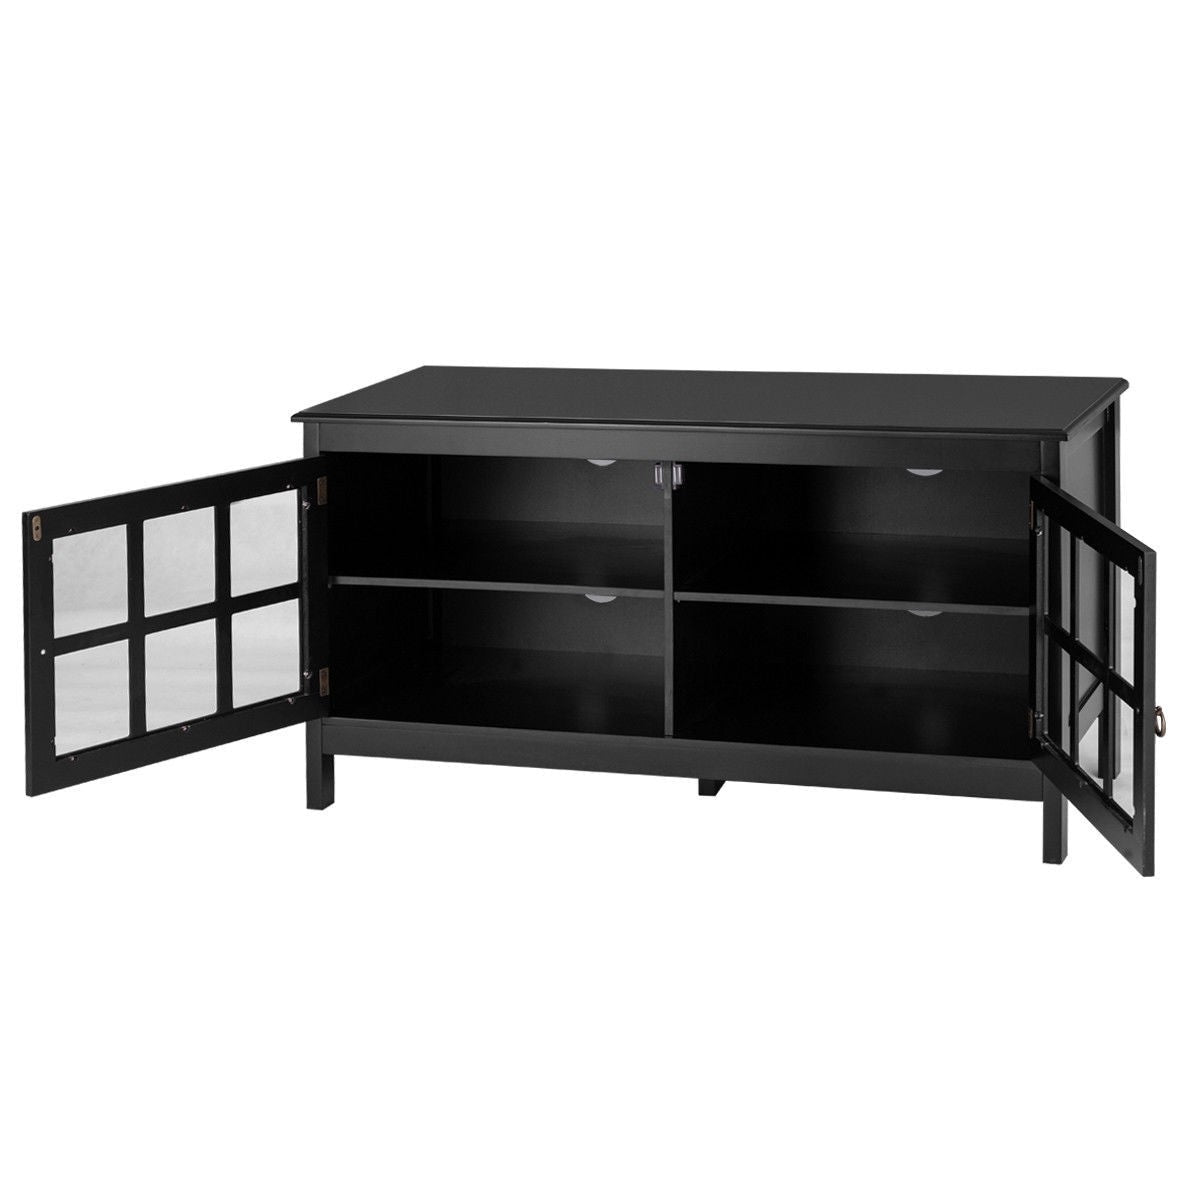 Living Room > TV Stands And Entertainment Centers - Black Wood TV Stand With Glass Panel Doors For Up To 50-inch TV